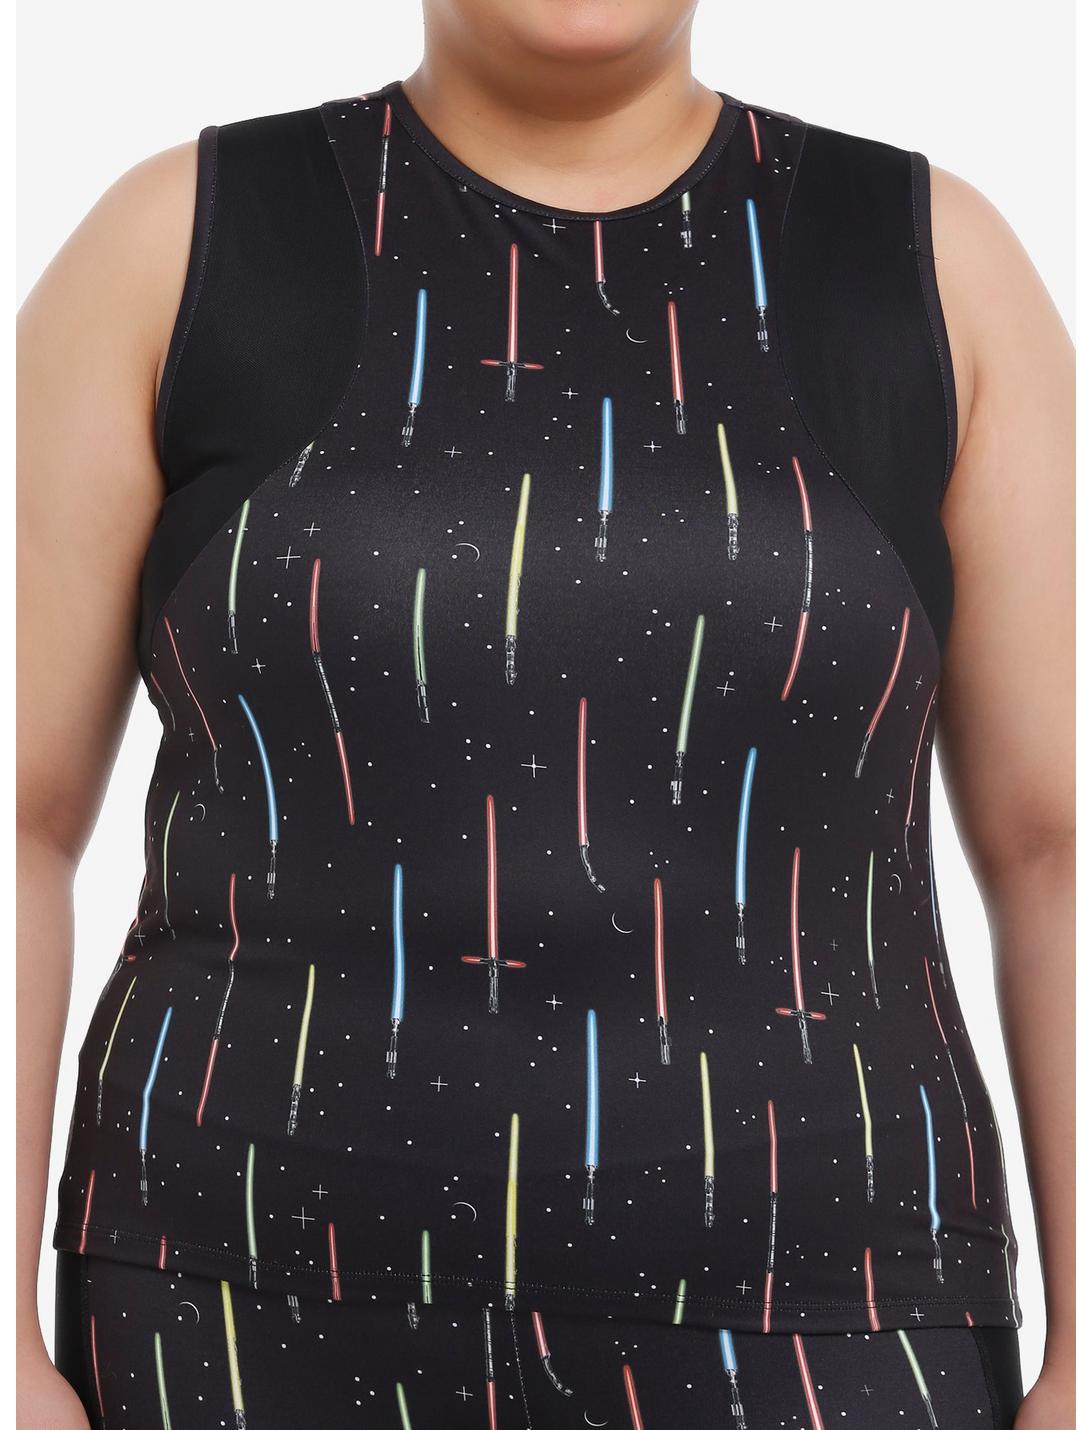 Her Universe Star Wars Lightsabers Active Tank Top Plus Size Her Universe Exclusive, MULTI, hi-res